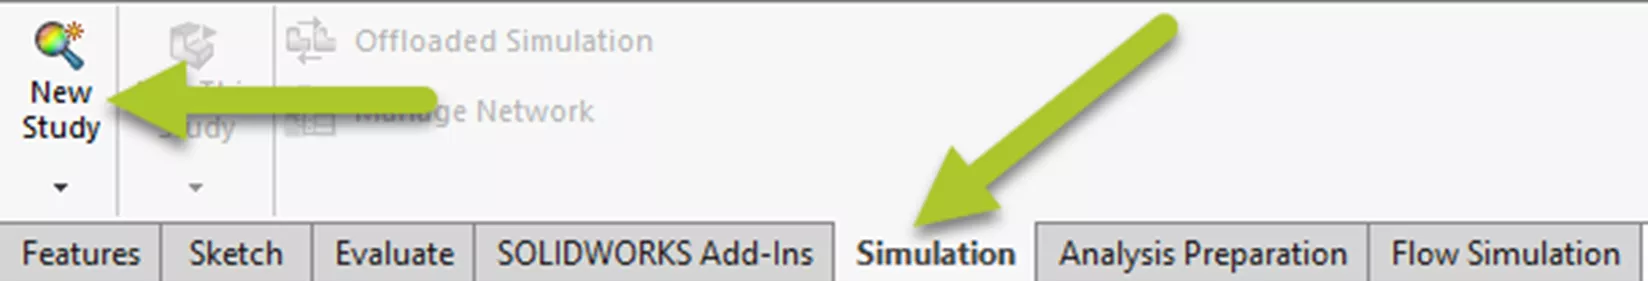 New Study Option in SOLIDWORKS Flow Simulation 